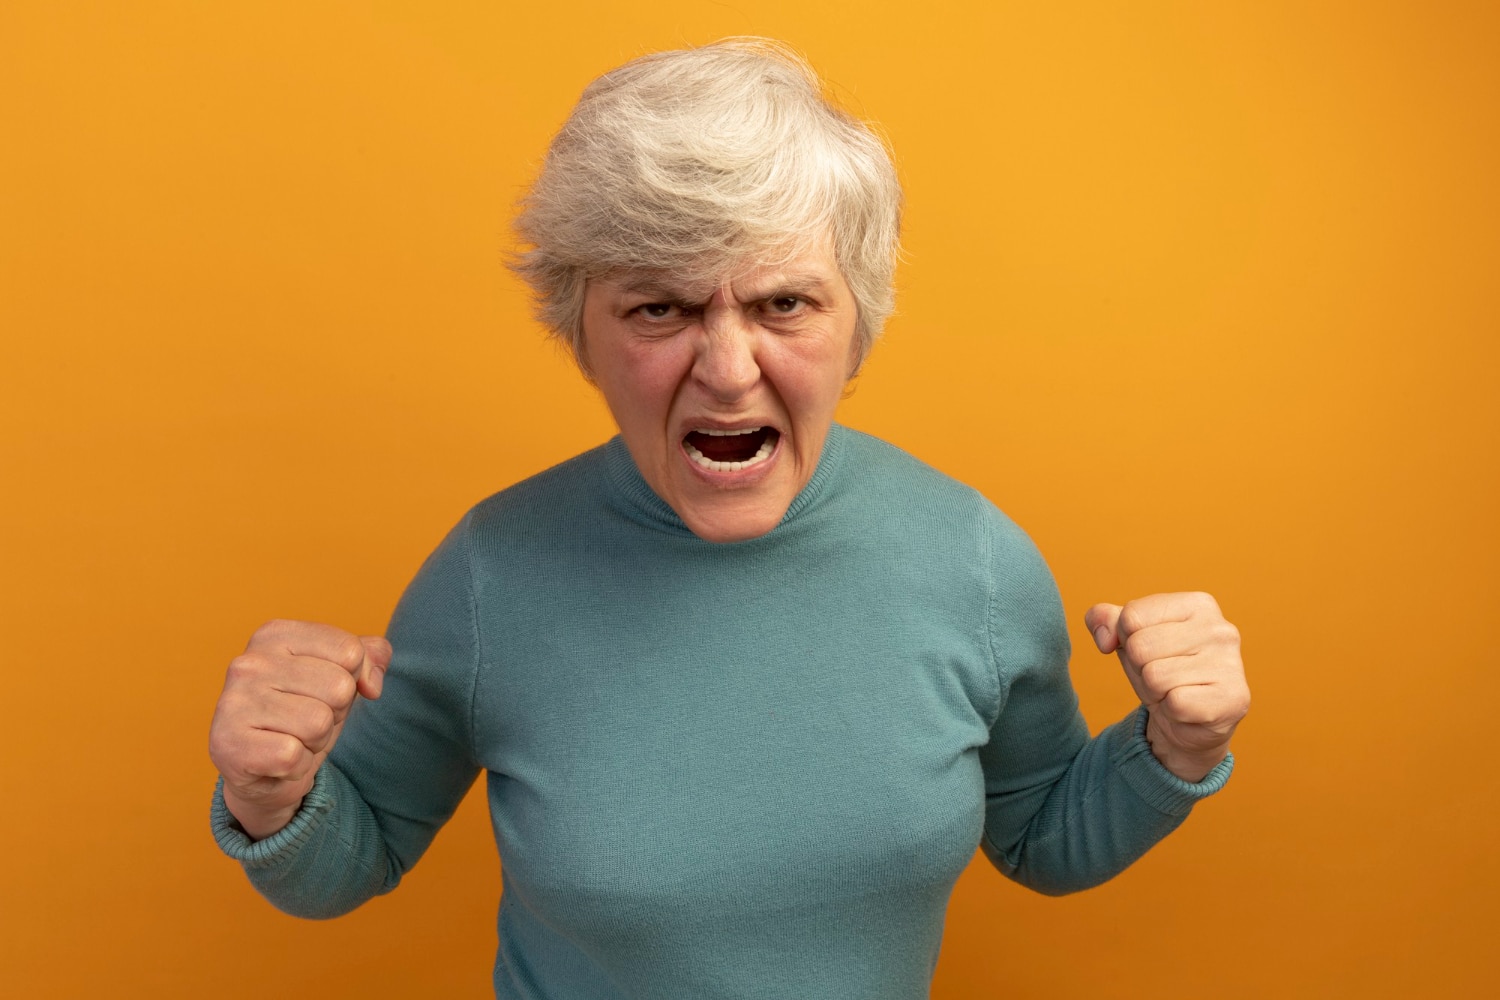 angry old woman wearing blue turtleneck sweater clenching fists screaming